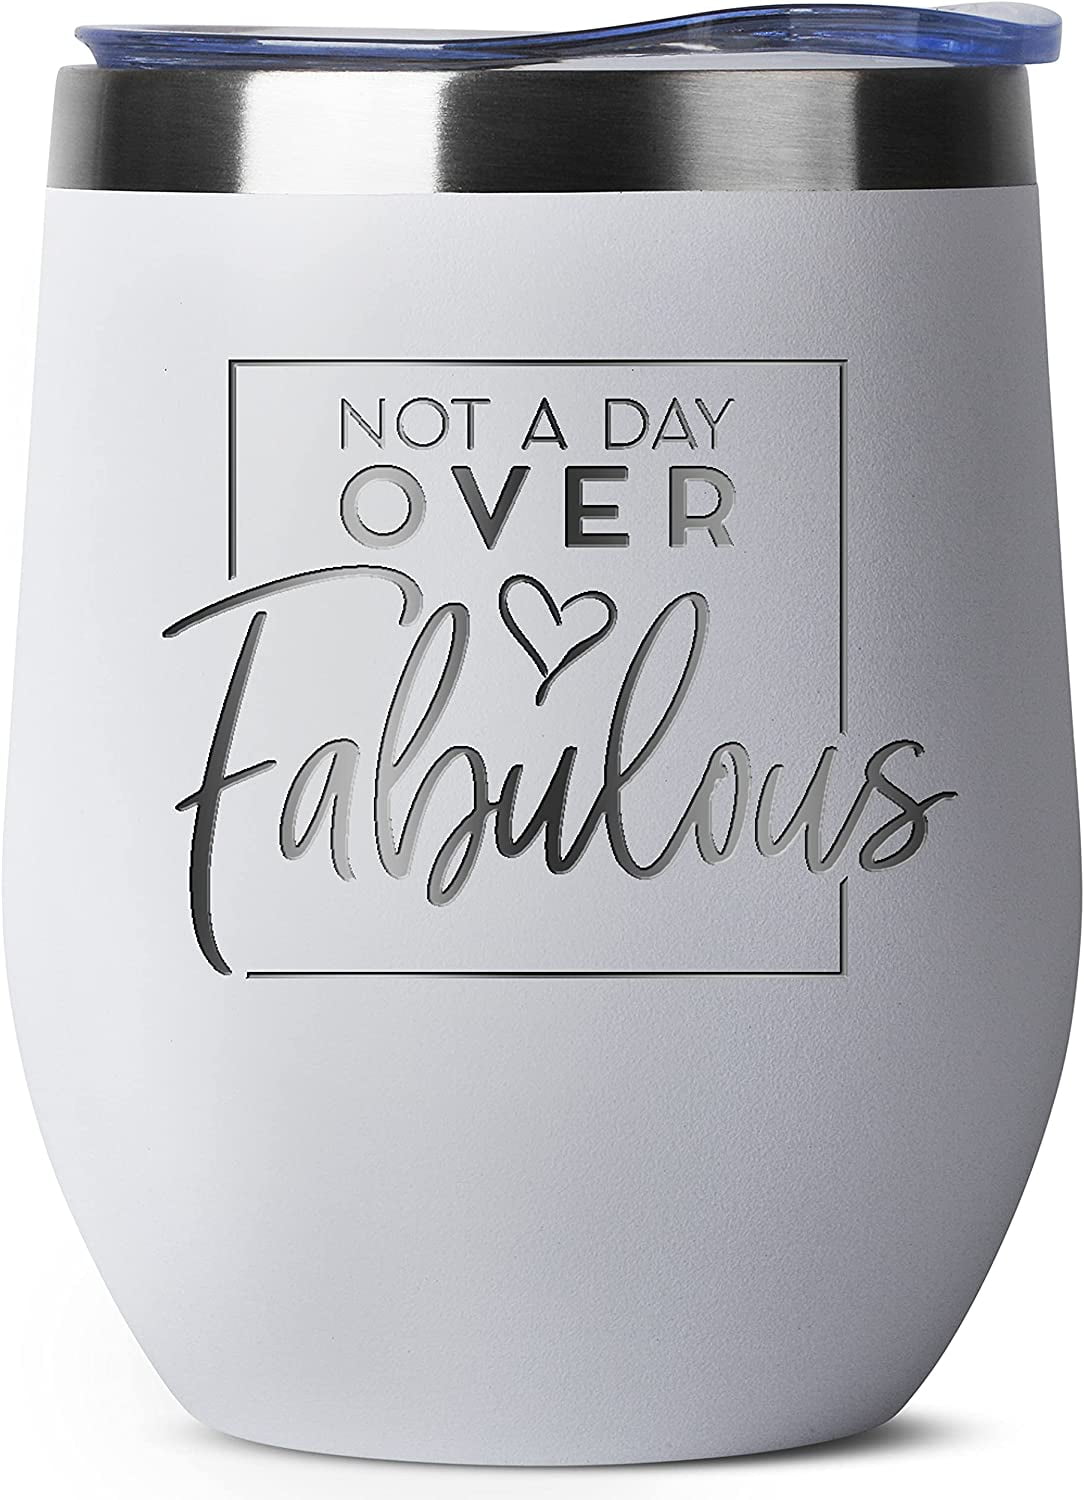 Black Mom Her Tumblers Party Decorations Supplies Presents Wife Friends 20oz Tumbler Best Gift Present Ideas for Women Daughter Stainless Steel Vacuum Insulated Wine Tumblers w/Lid